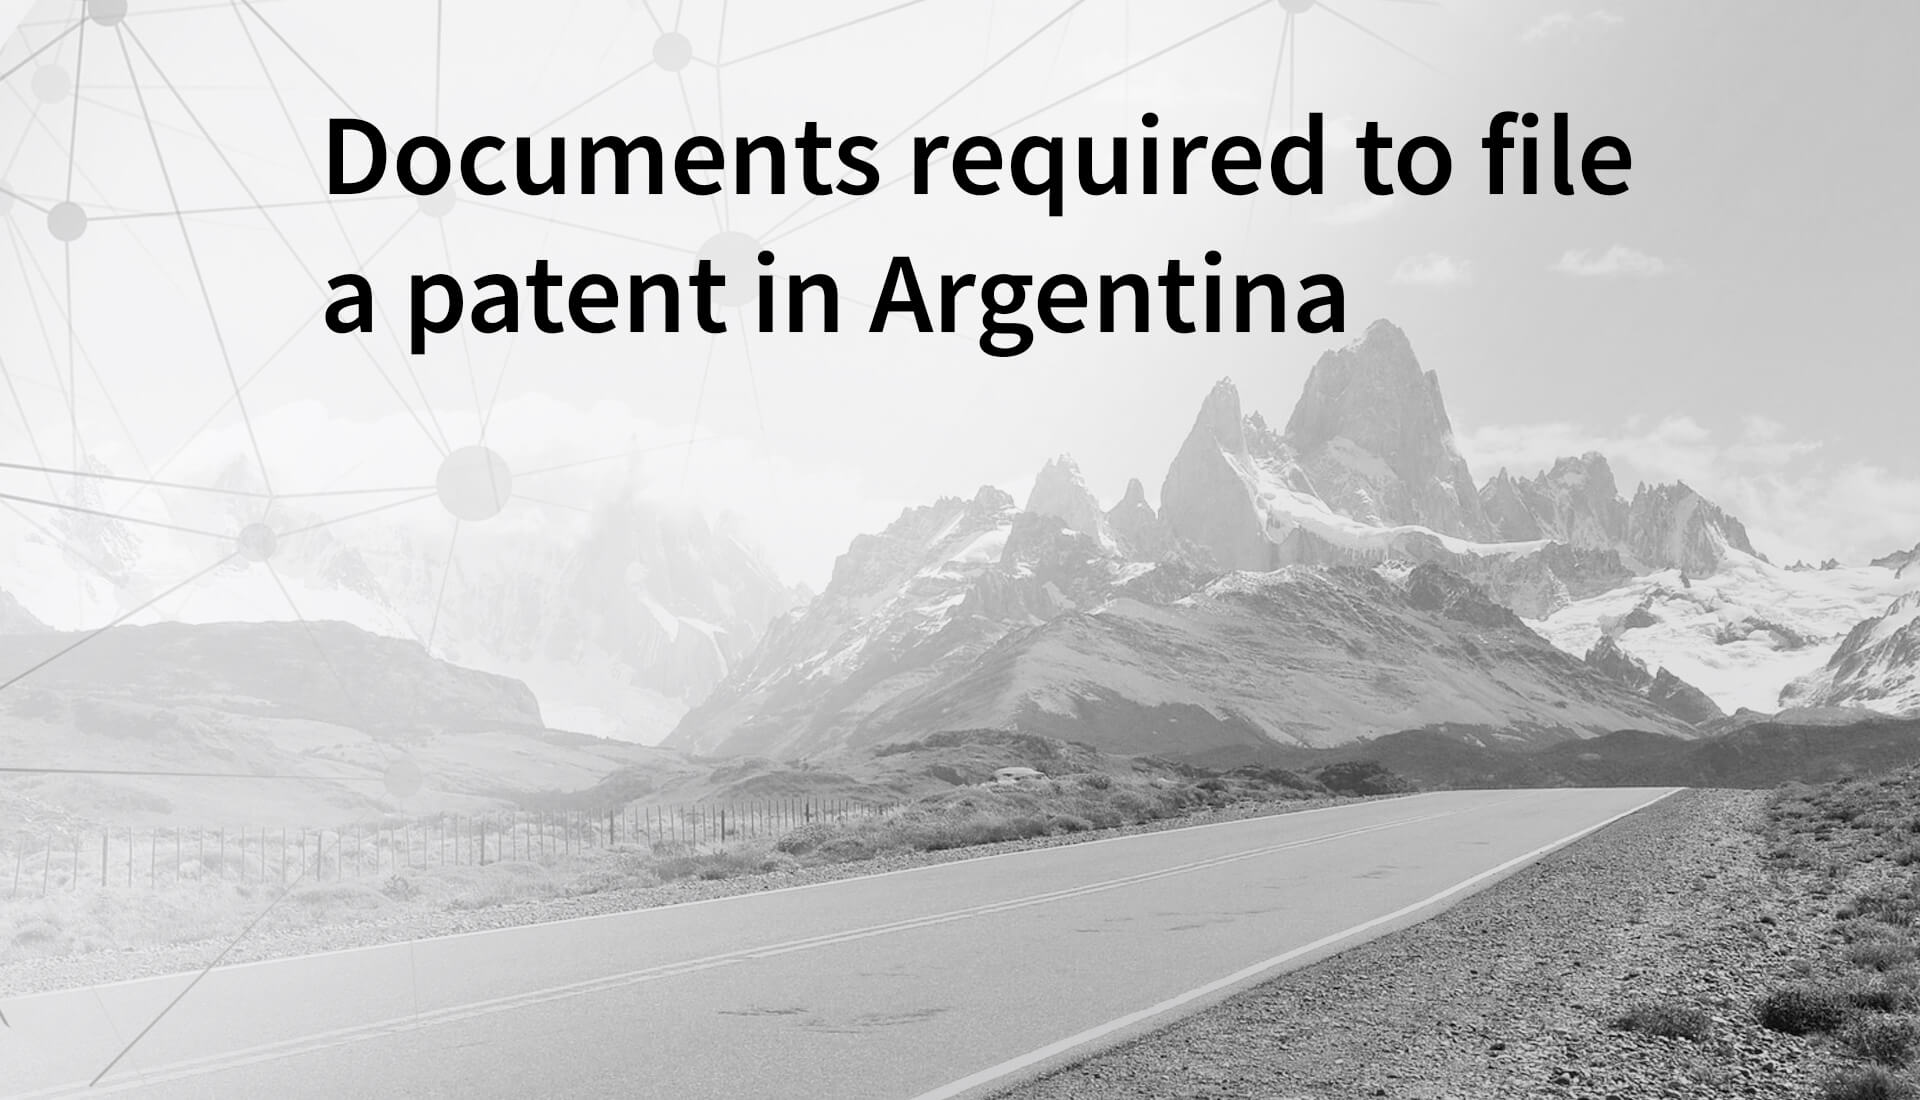 Documents required to file patent Argentina